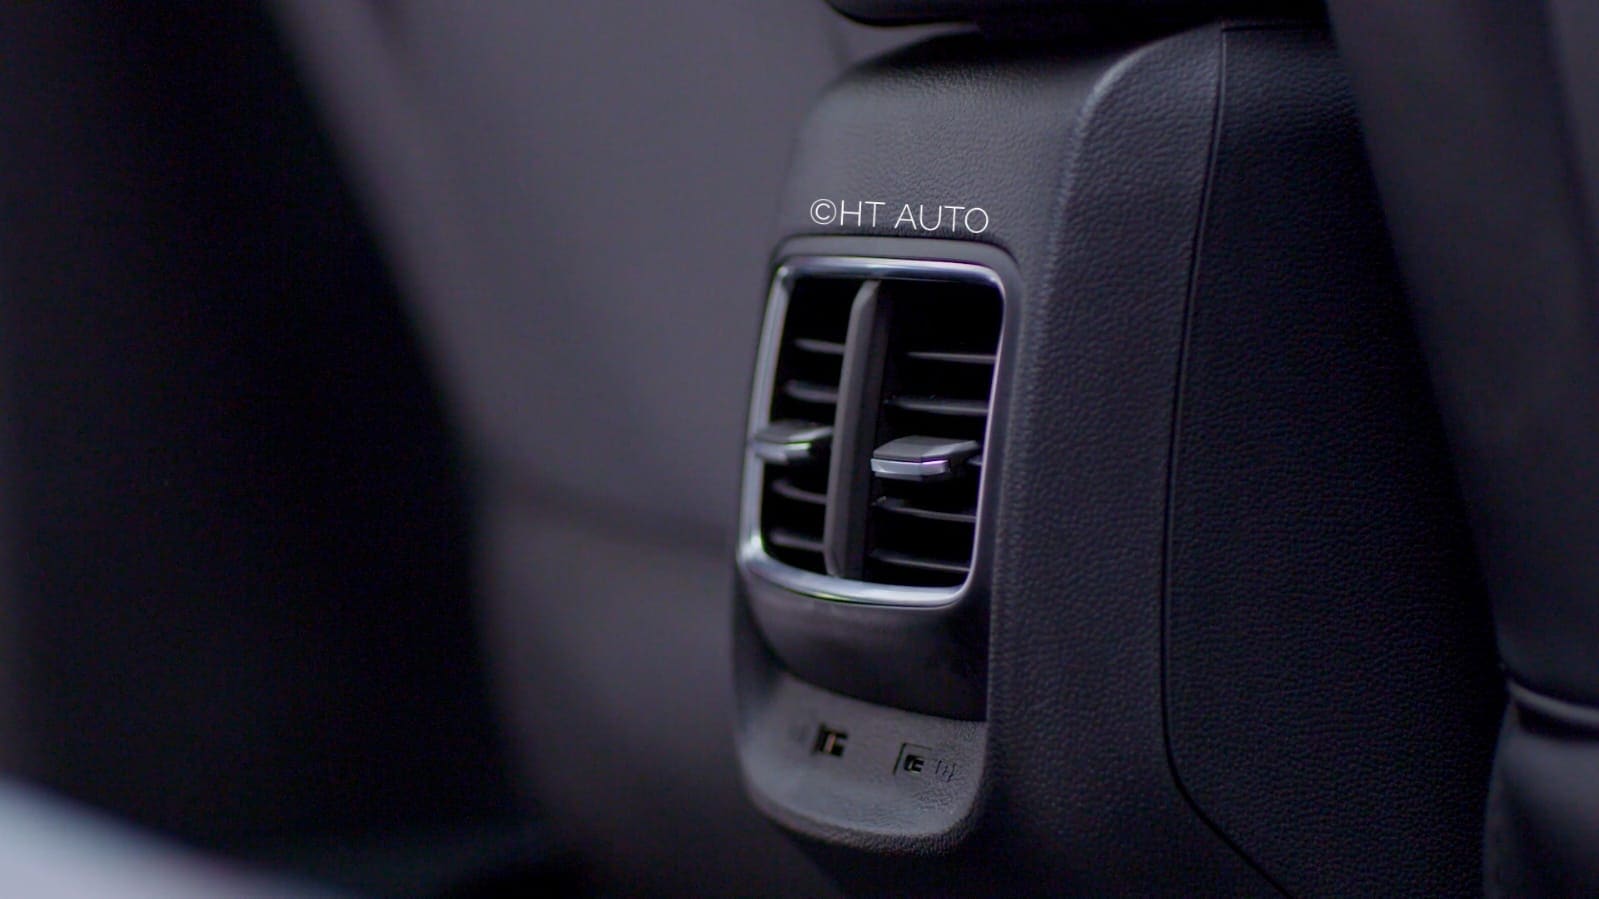 There are plenty of USB charging points all around the ZS EV. This shows the points just under the rear AC vents.